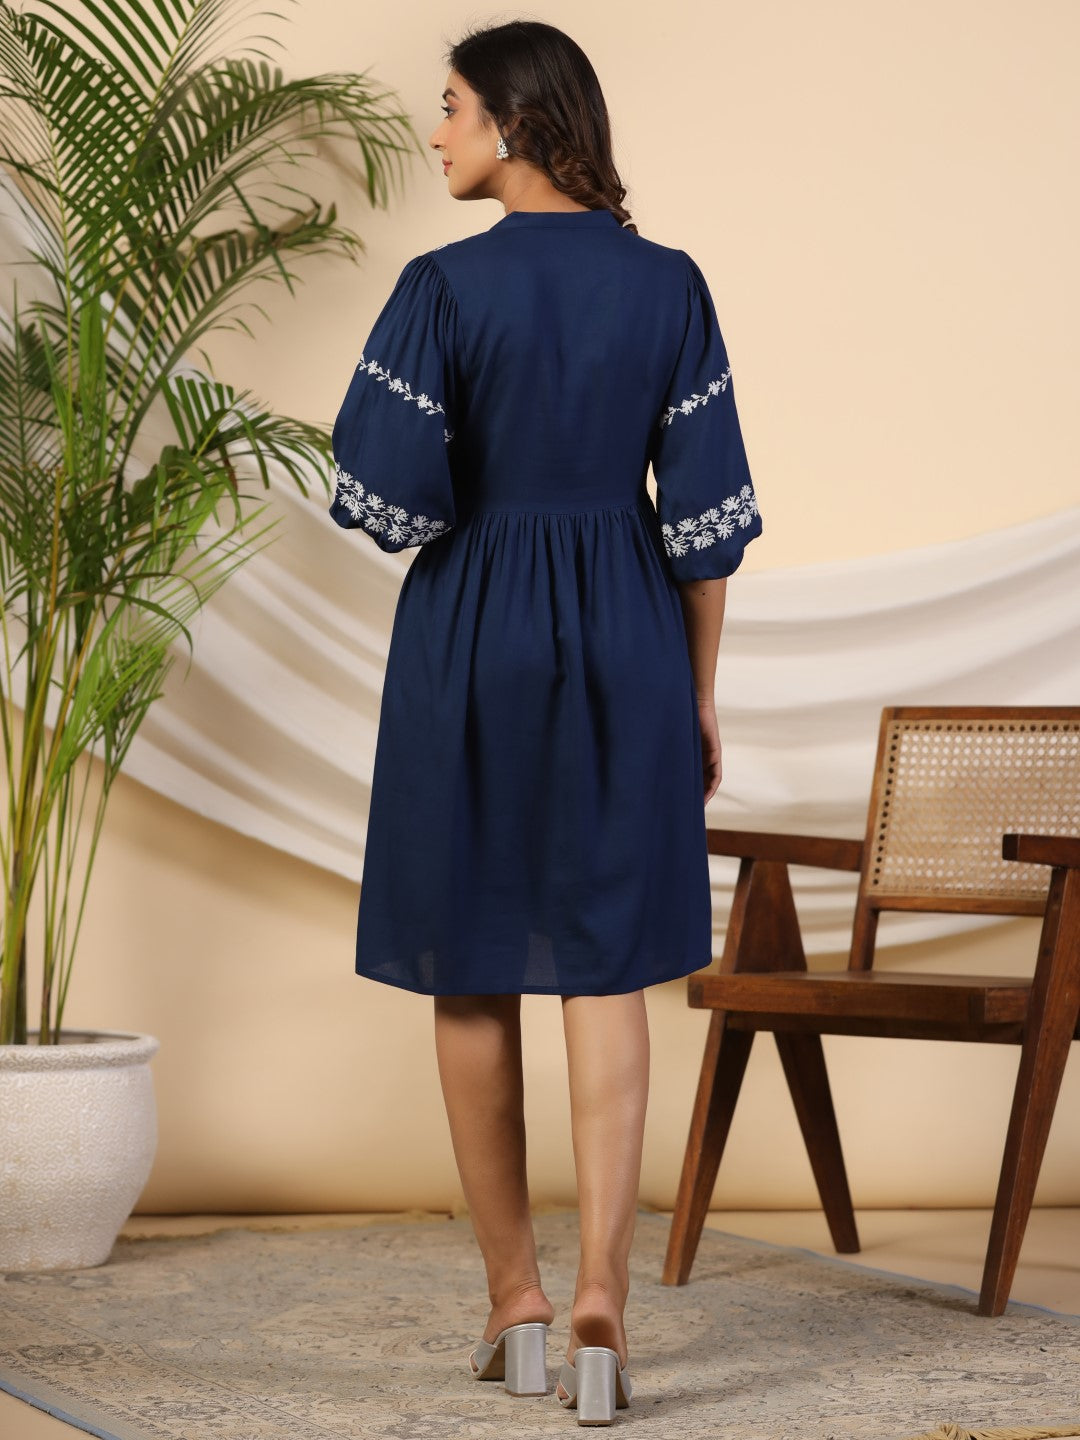 Navy Blue Rayon Embroidered Short Dress